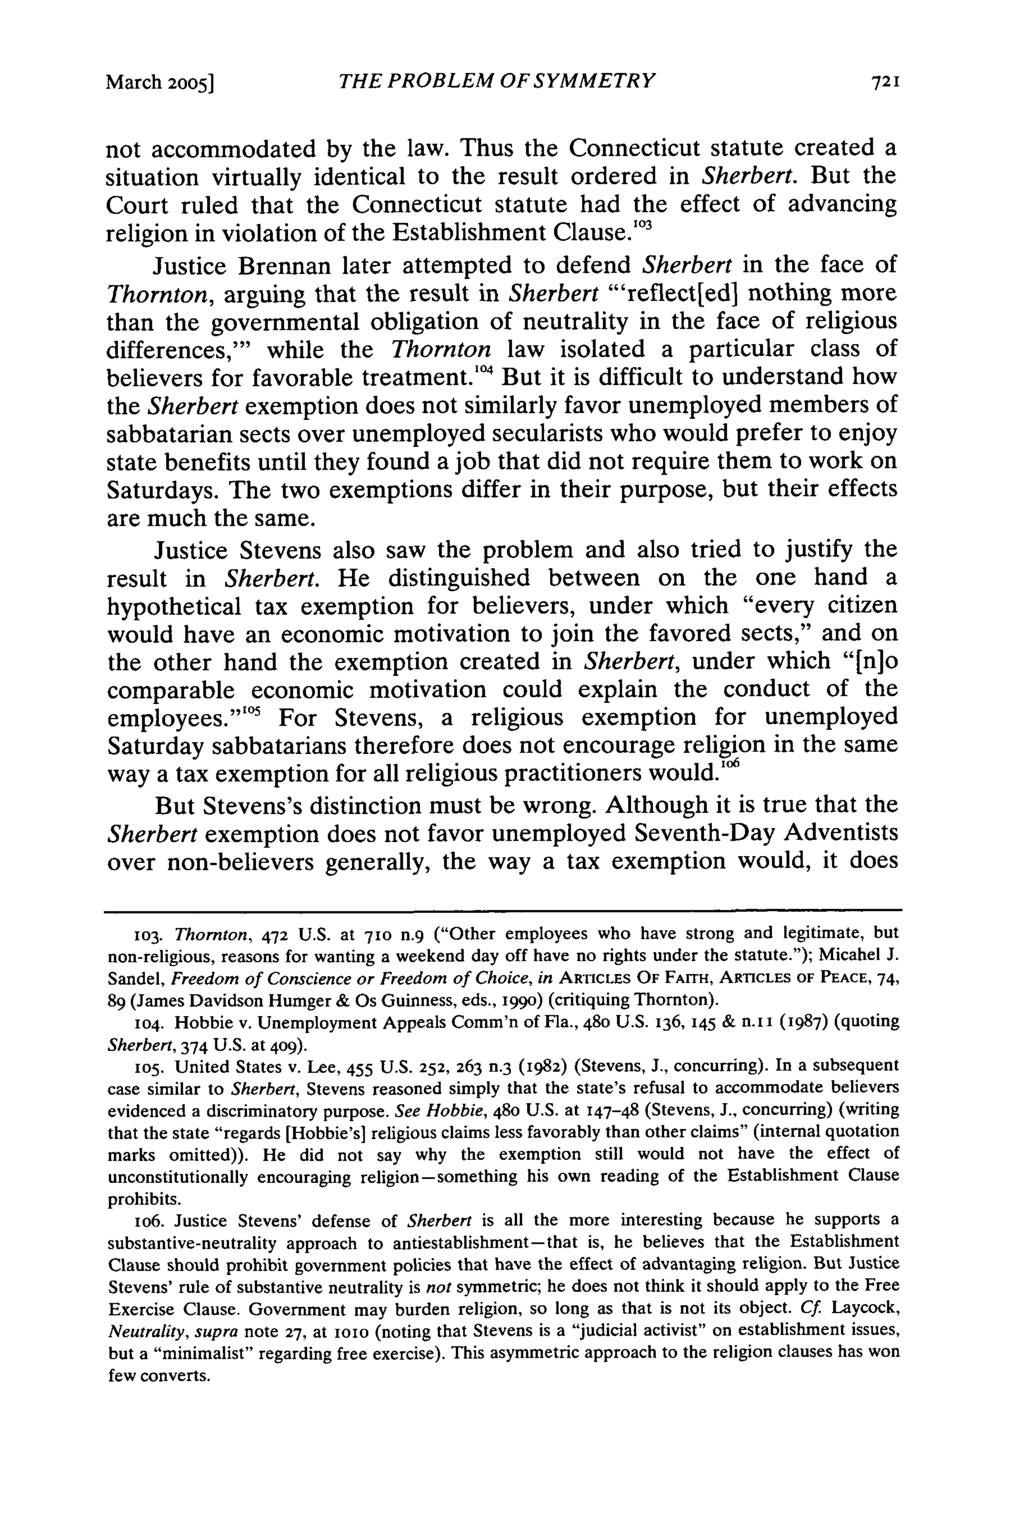 March 2005] THE PROBLEM OF SYMMETRY not accommodated by the law. Thus the Connecticut statute created a situation virtually identical to the result ordered in Sherbert.